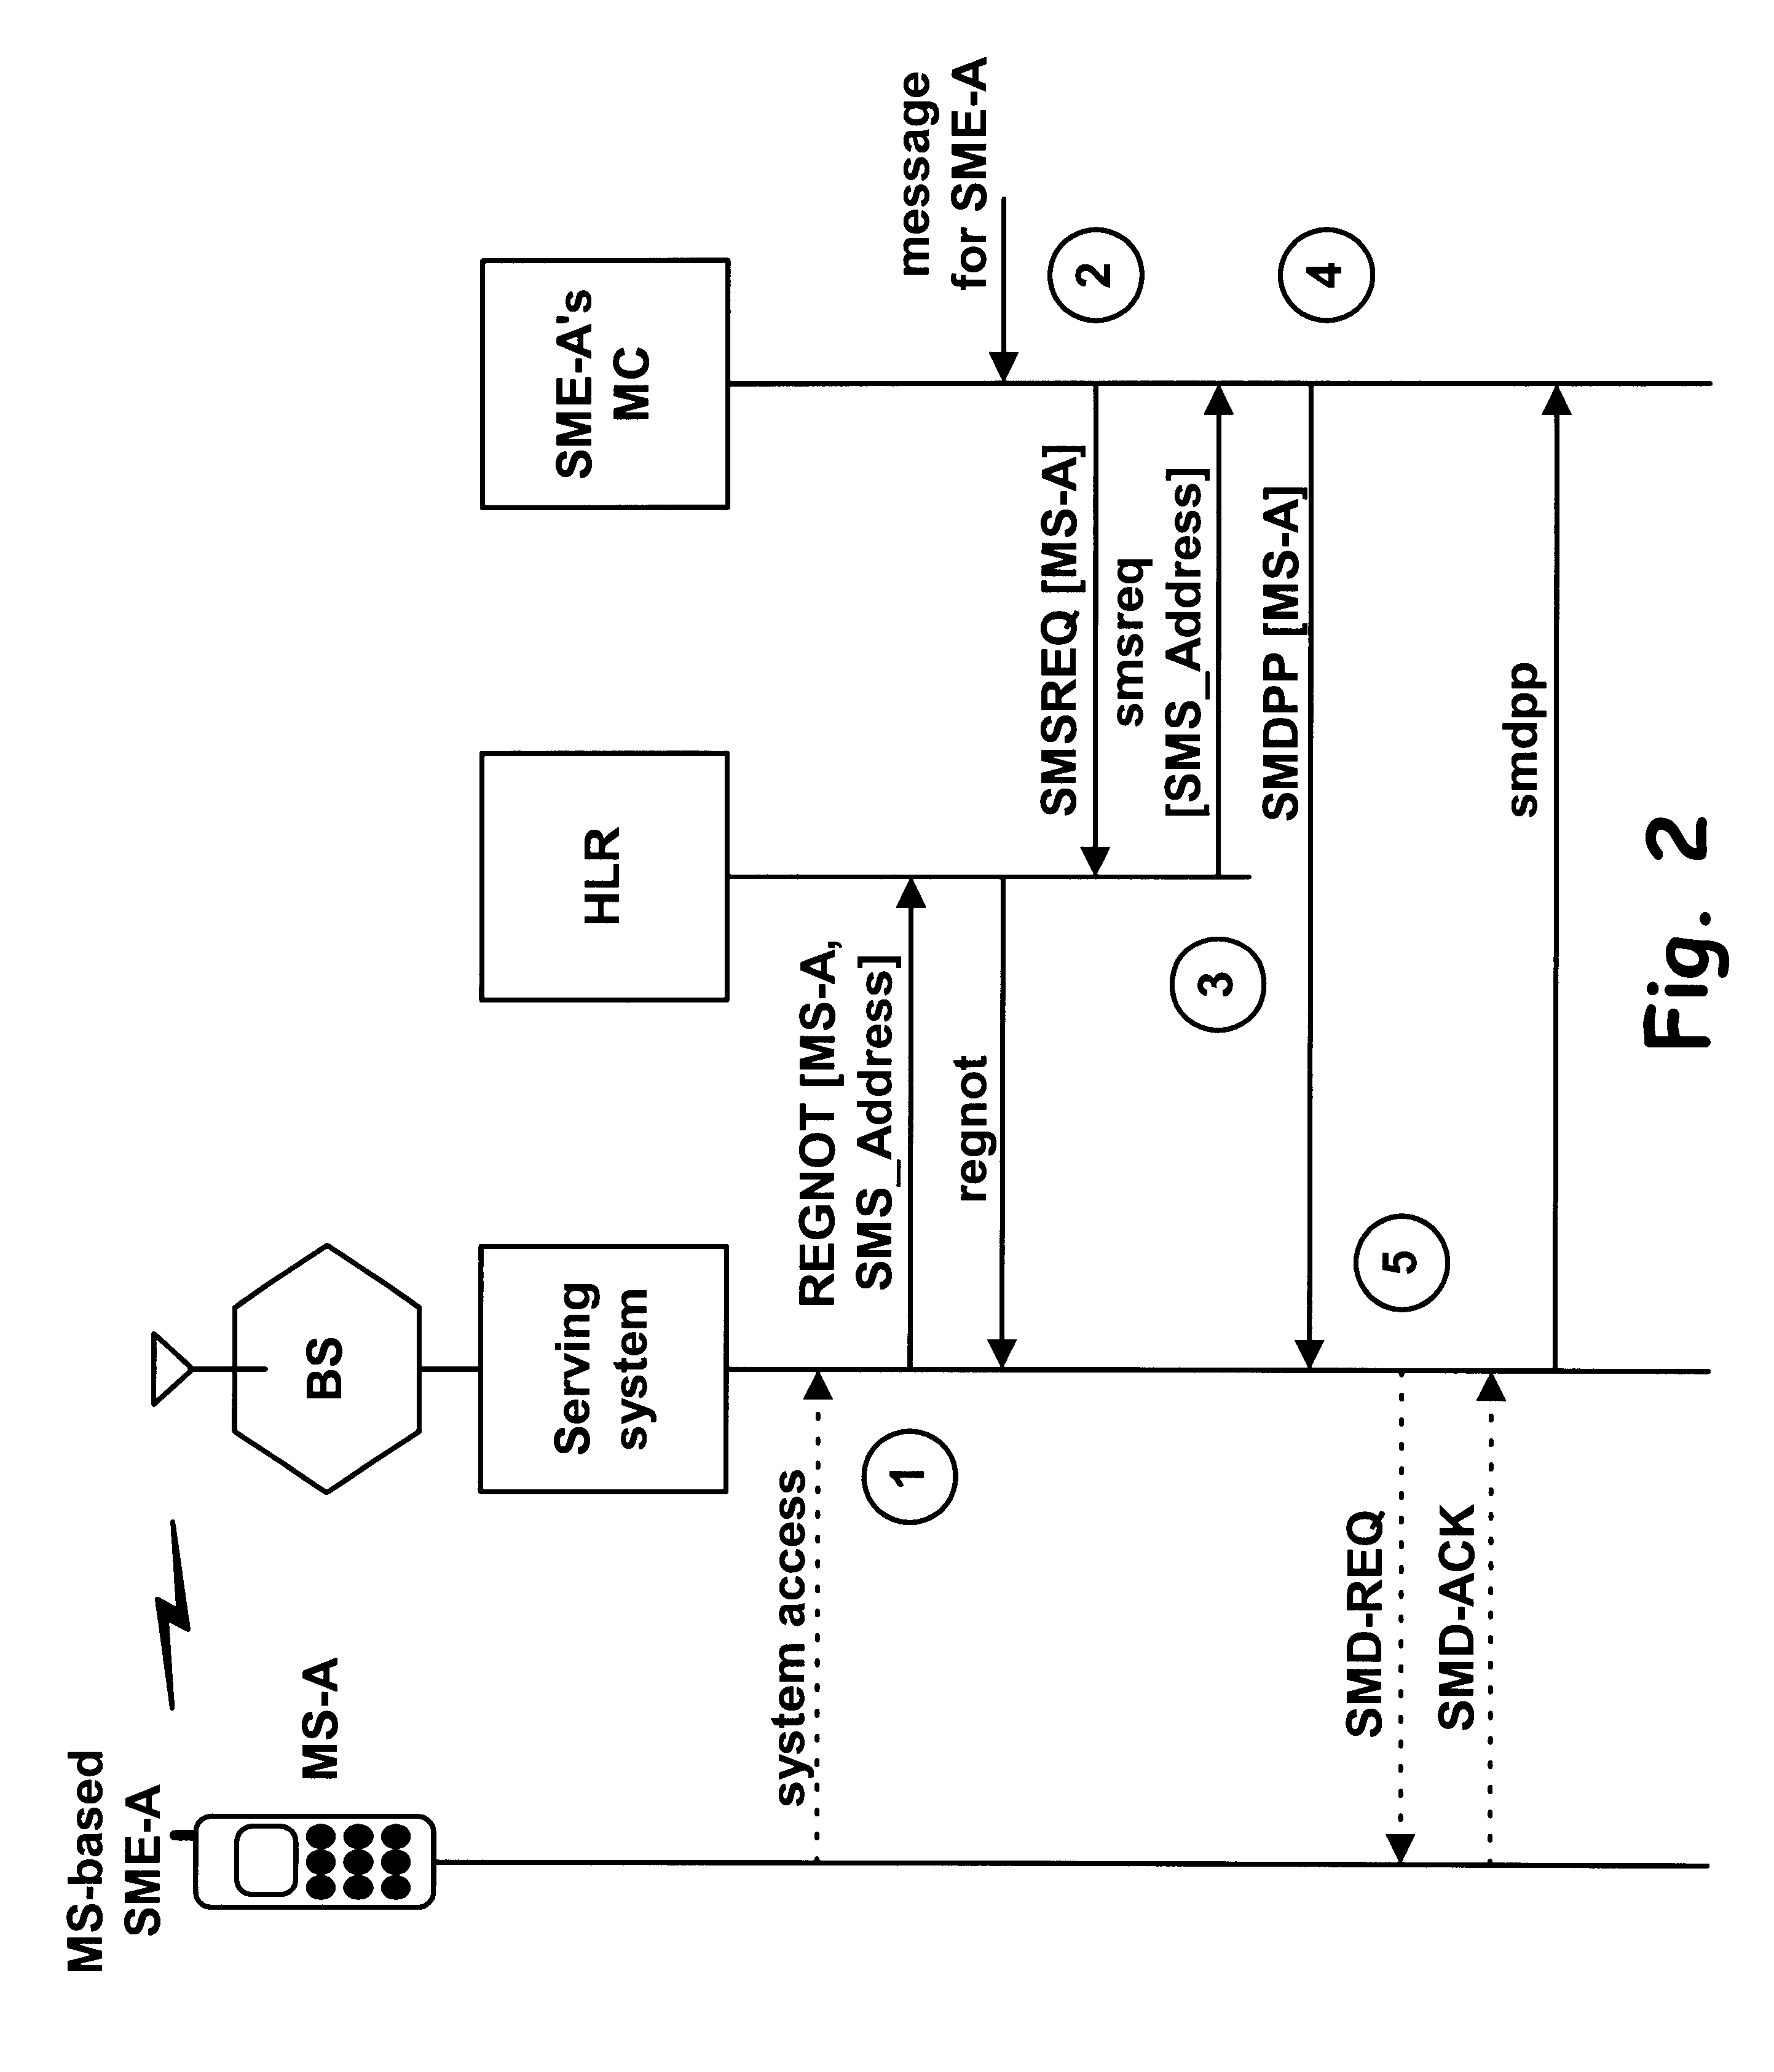 Automatic in-line messaging system